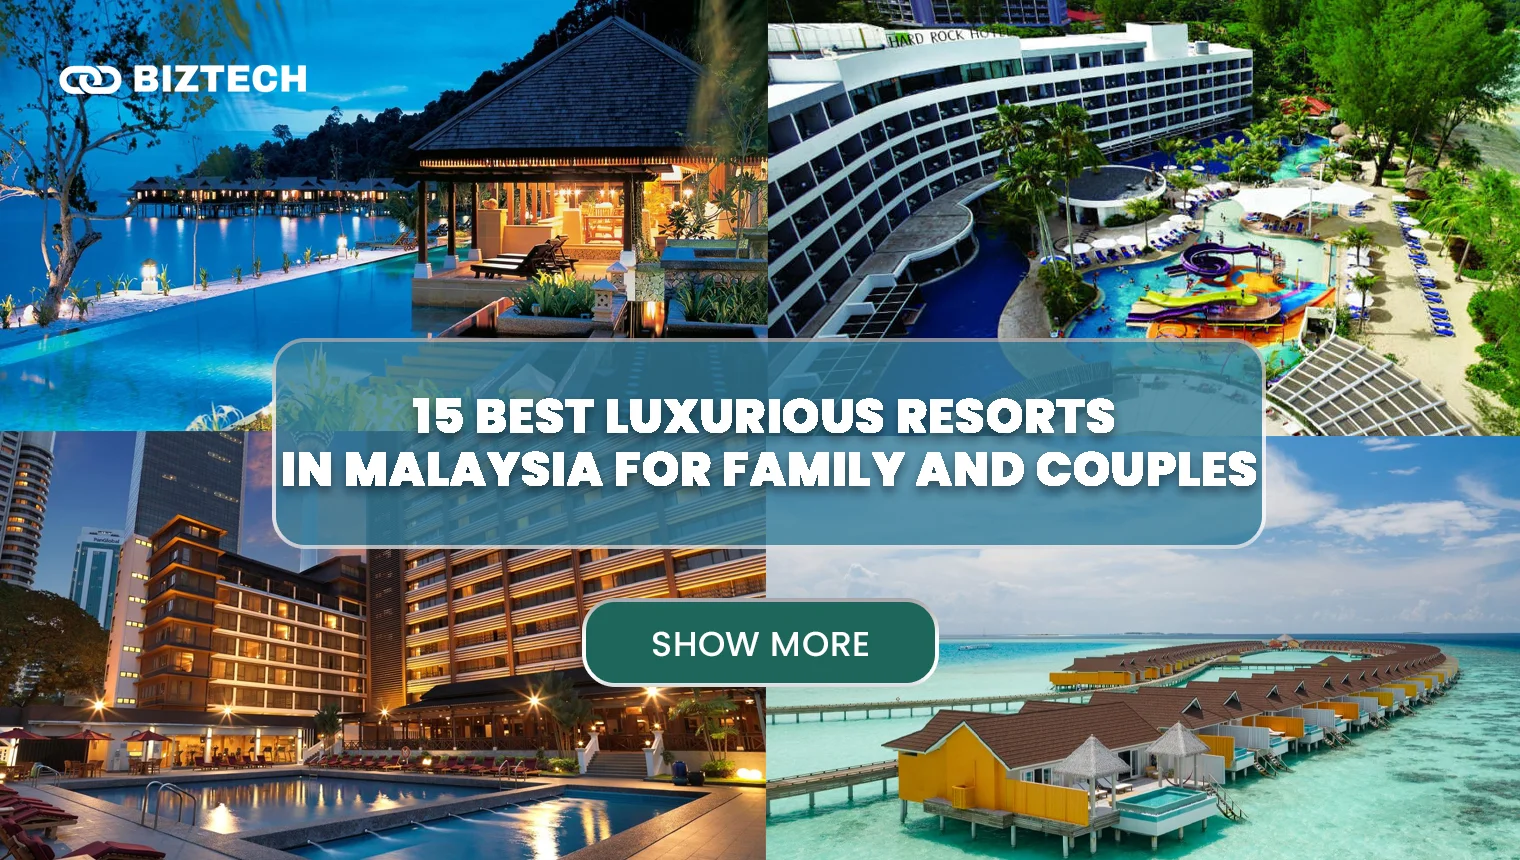 15 Best Luxurious Resorts In Malaysia For Family And Couples.webp